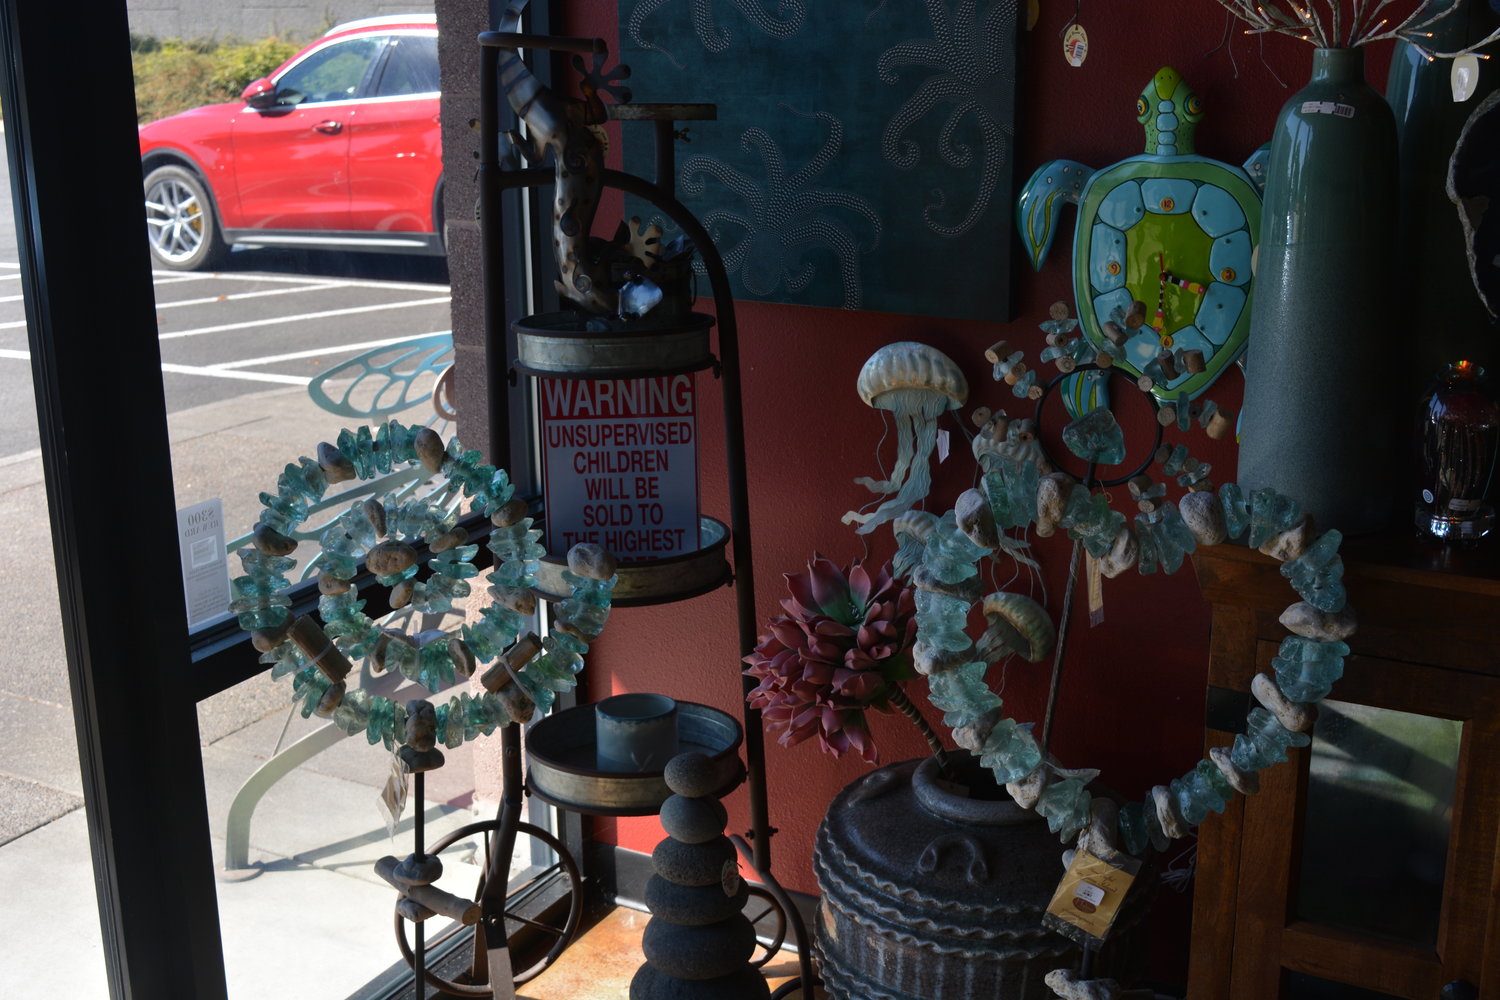 Decorative items made of recycled glass from Indonesia are displayed at Rare Earth Decor in Ridgefield on Aug. 24.